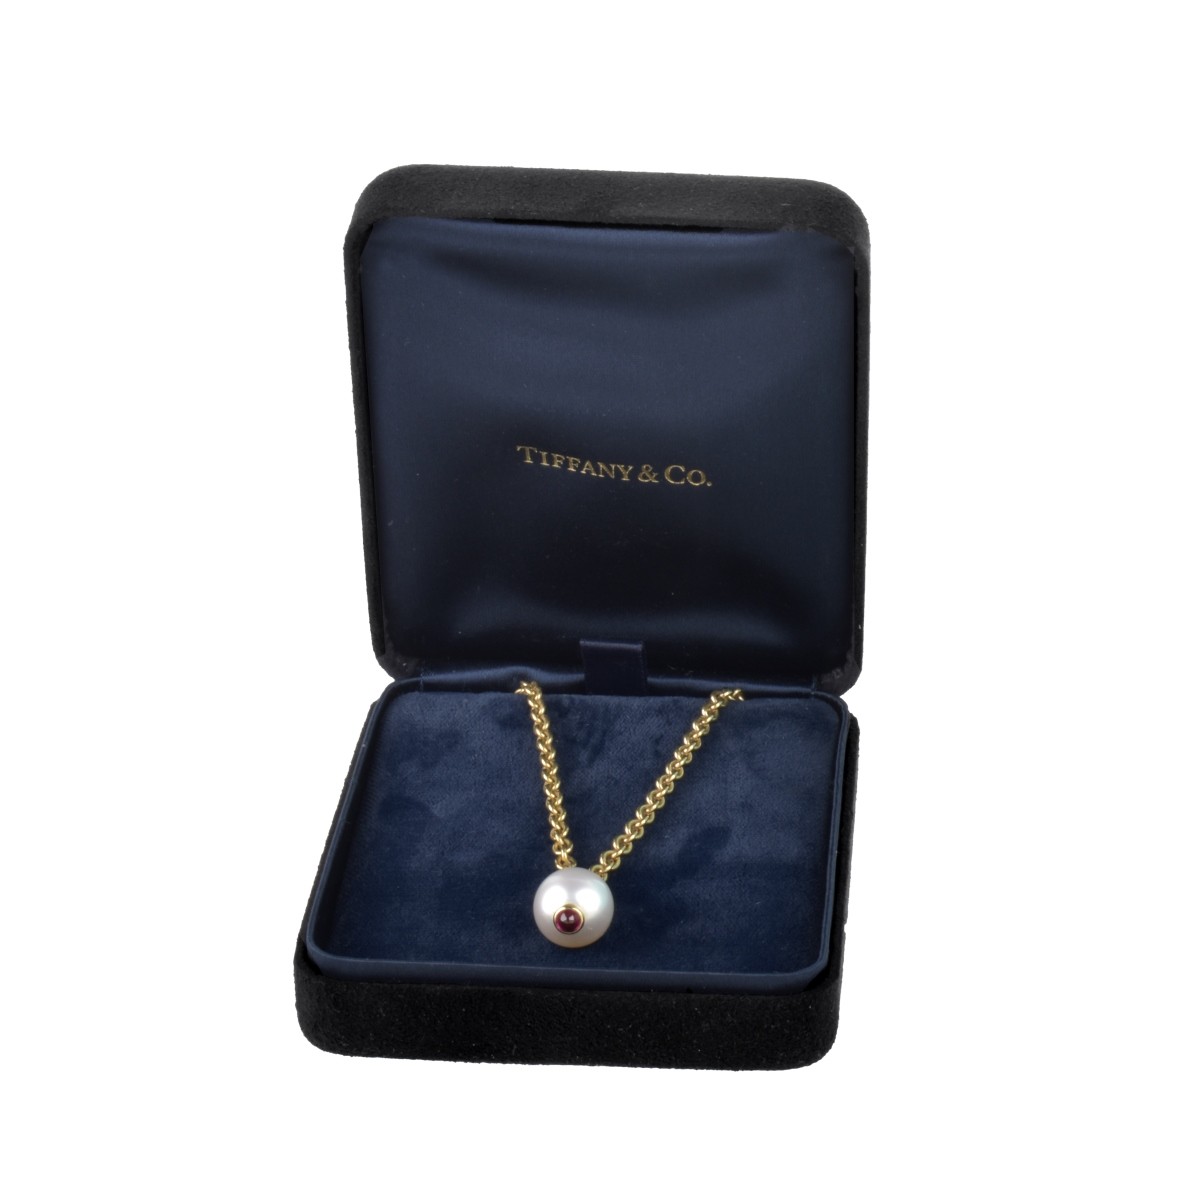 Tiffany & Co 18K and Pearl Necklace